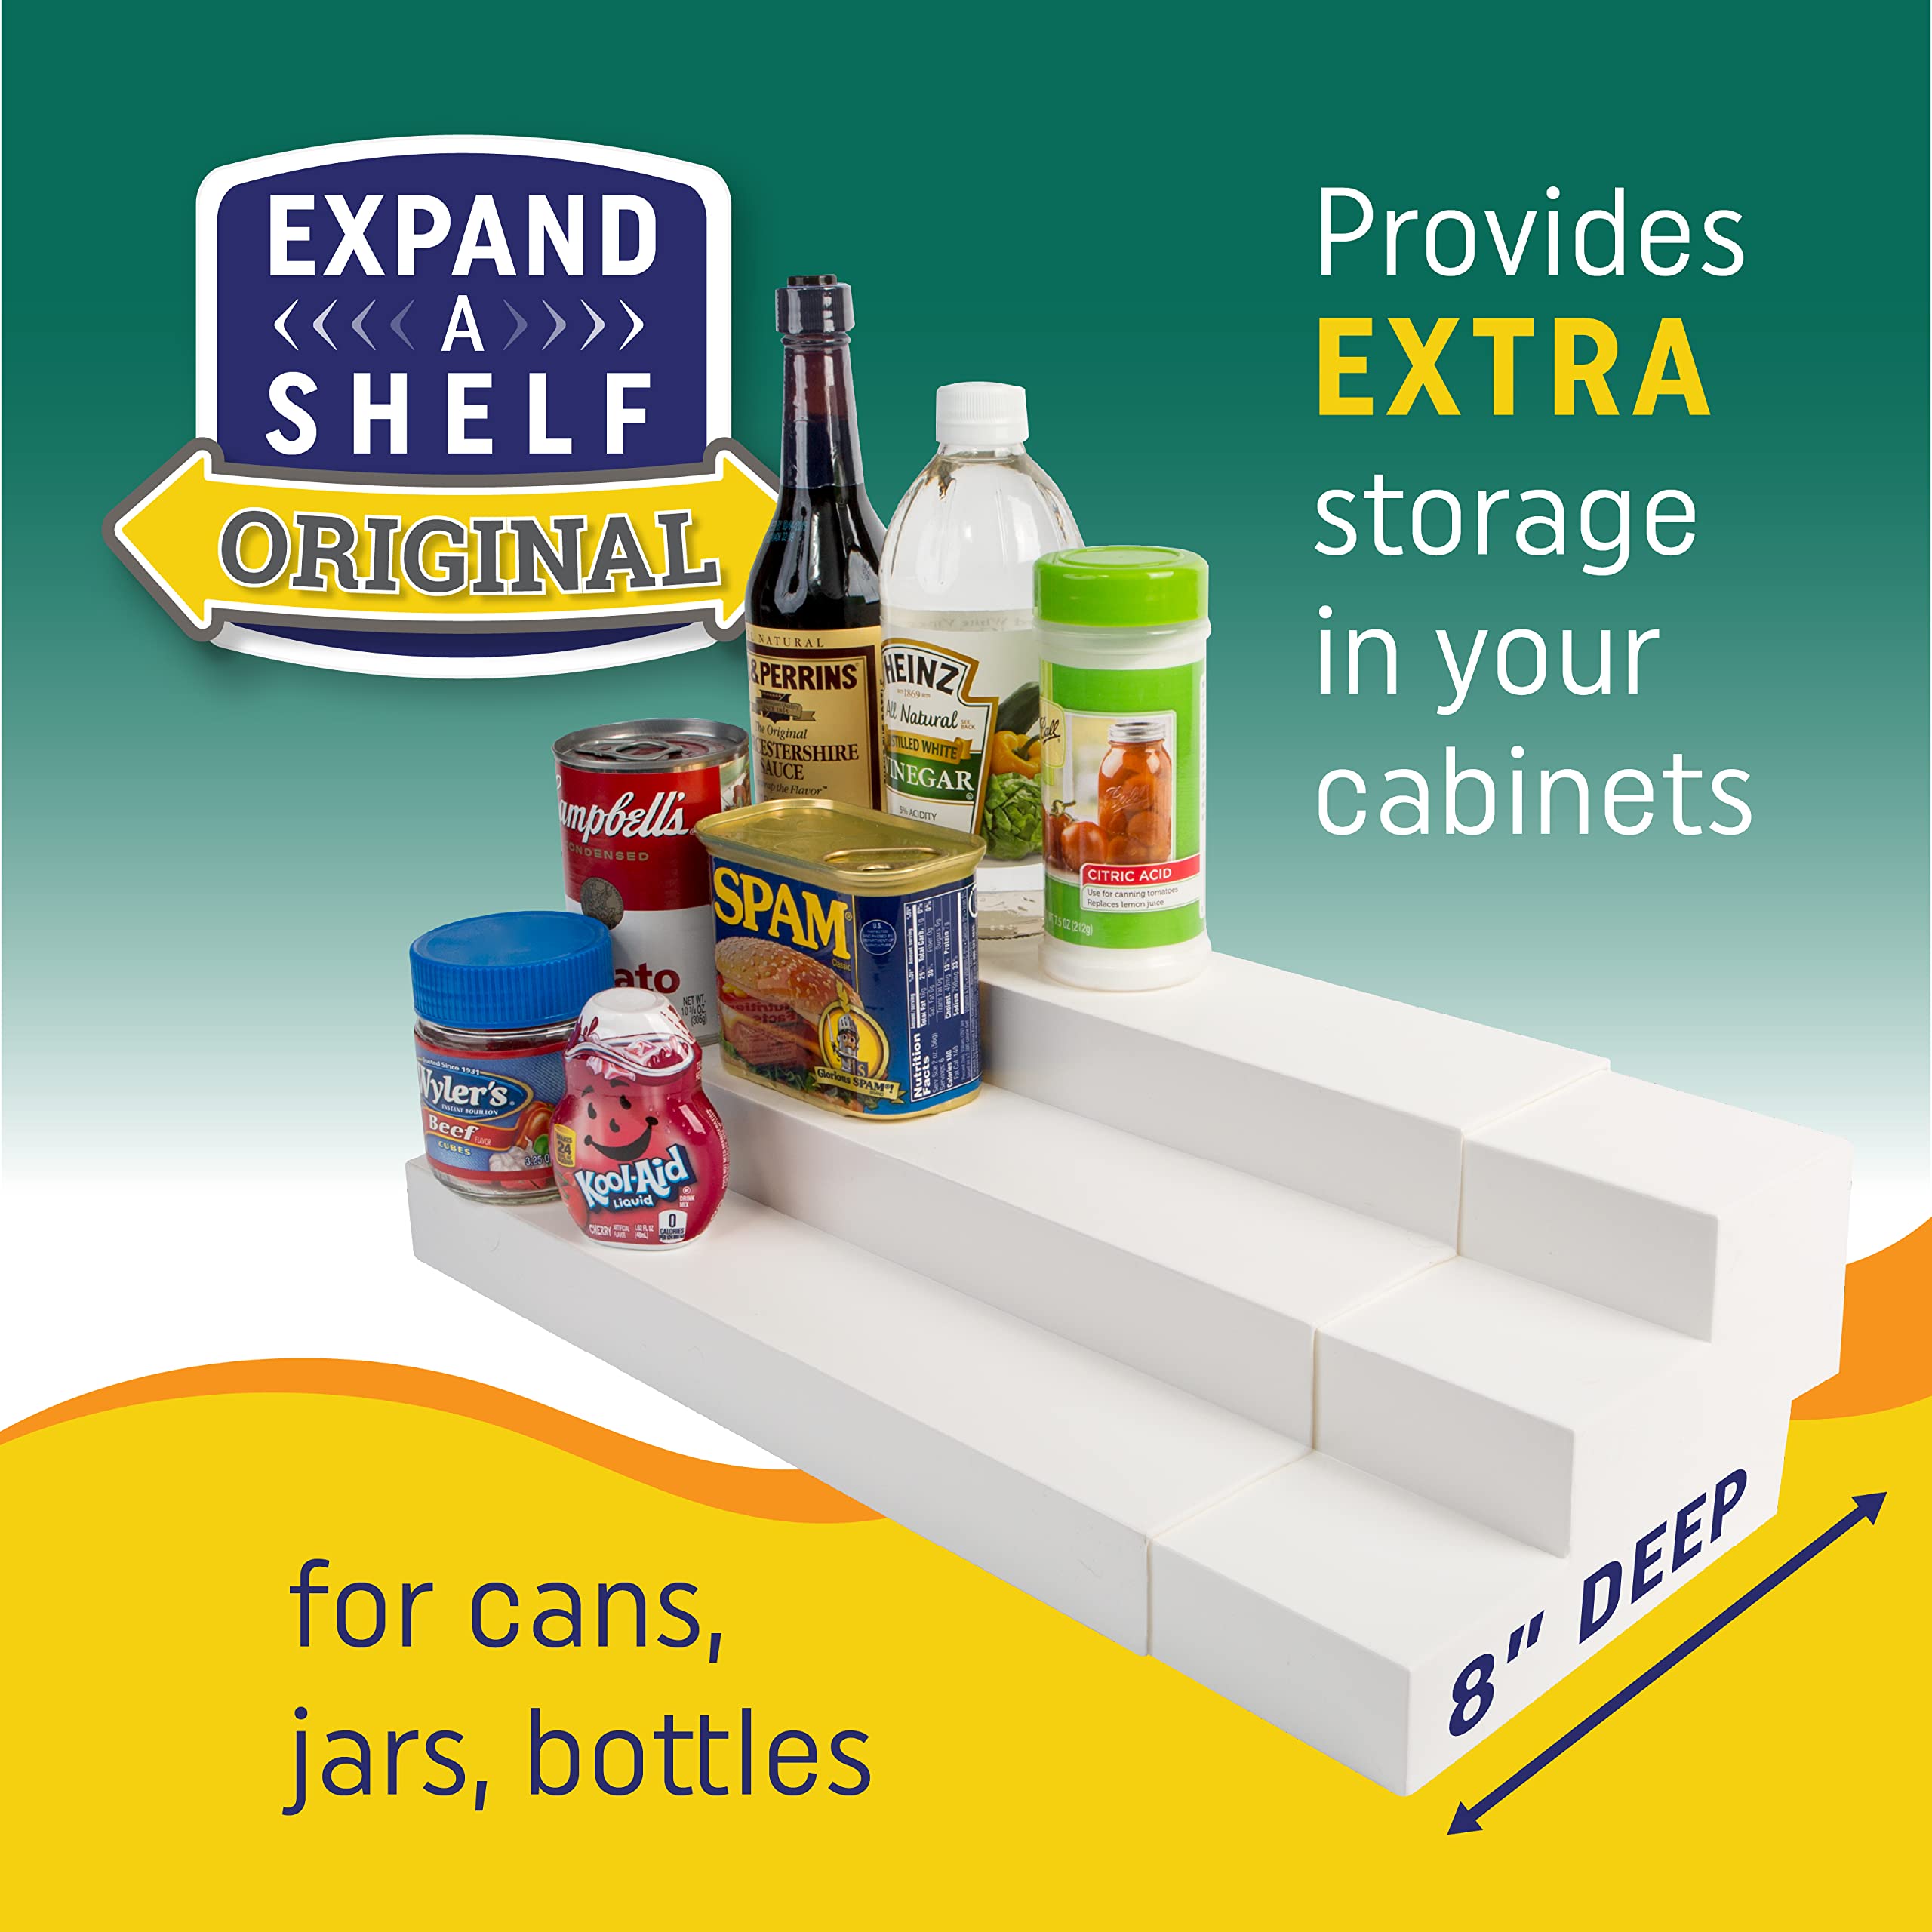 Dial Industries 3 Tiered Adjustable Canned Goods Shelves for Kitchen Cabinet and Pantry Organization, Expand A Shelf